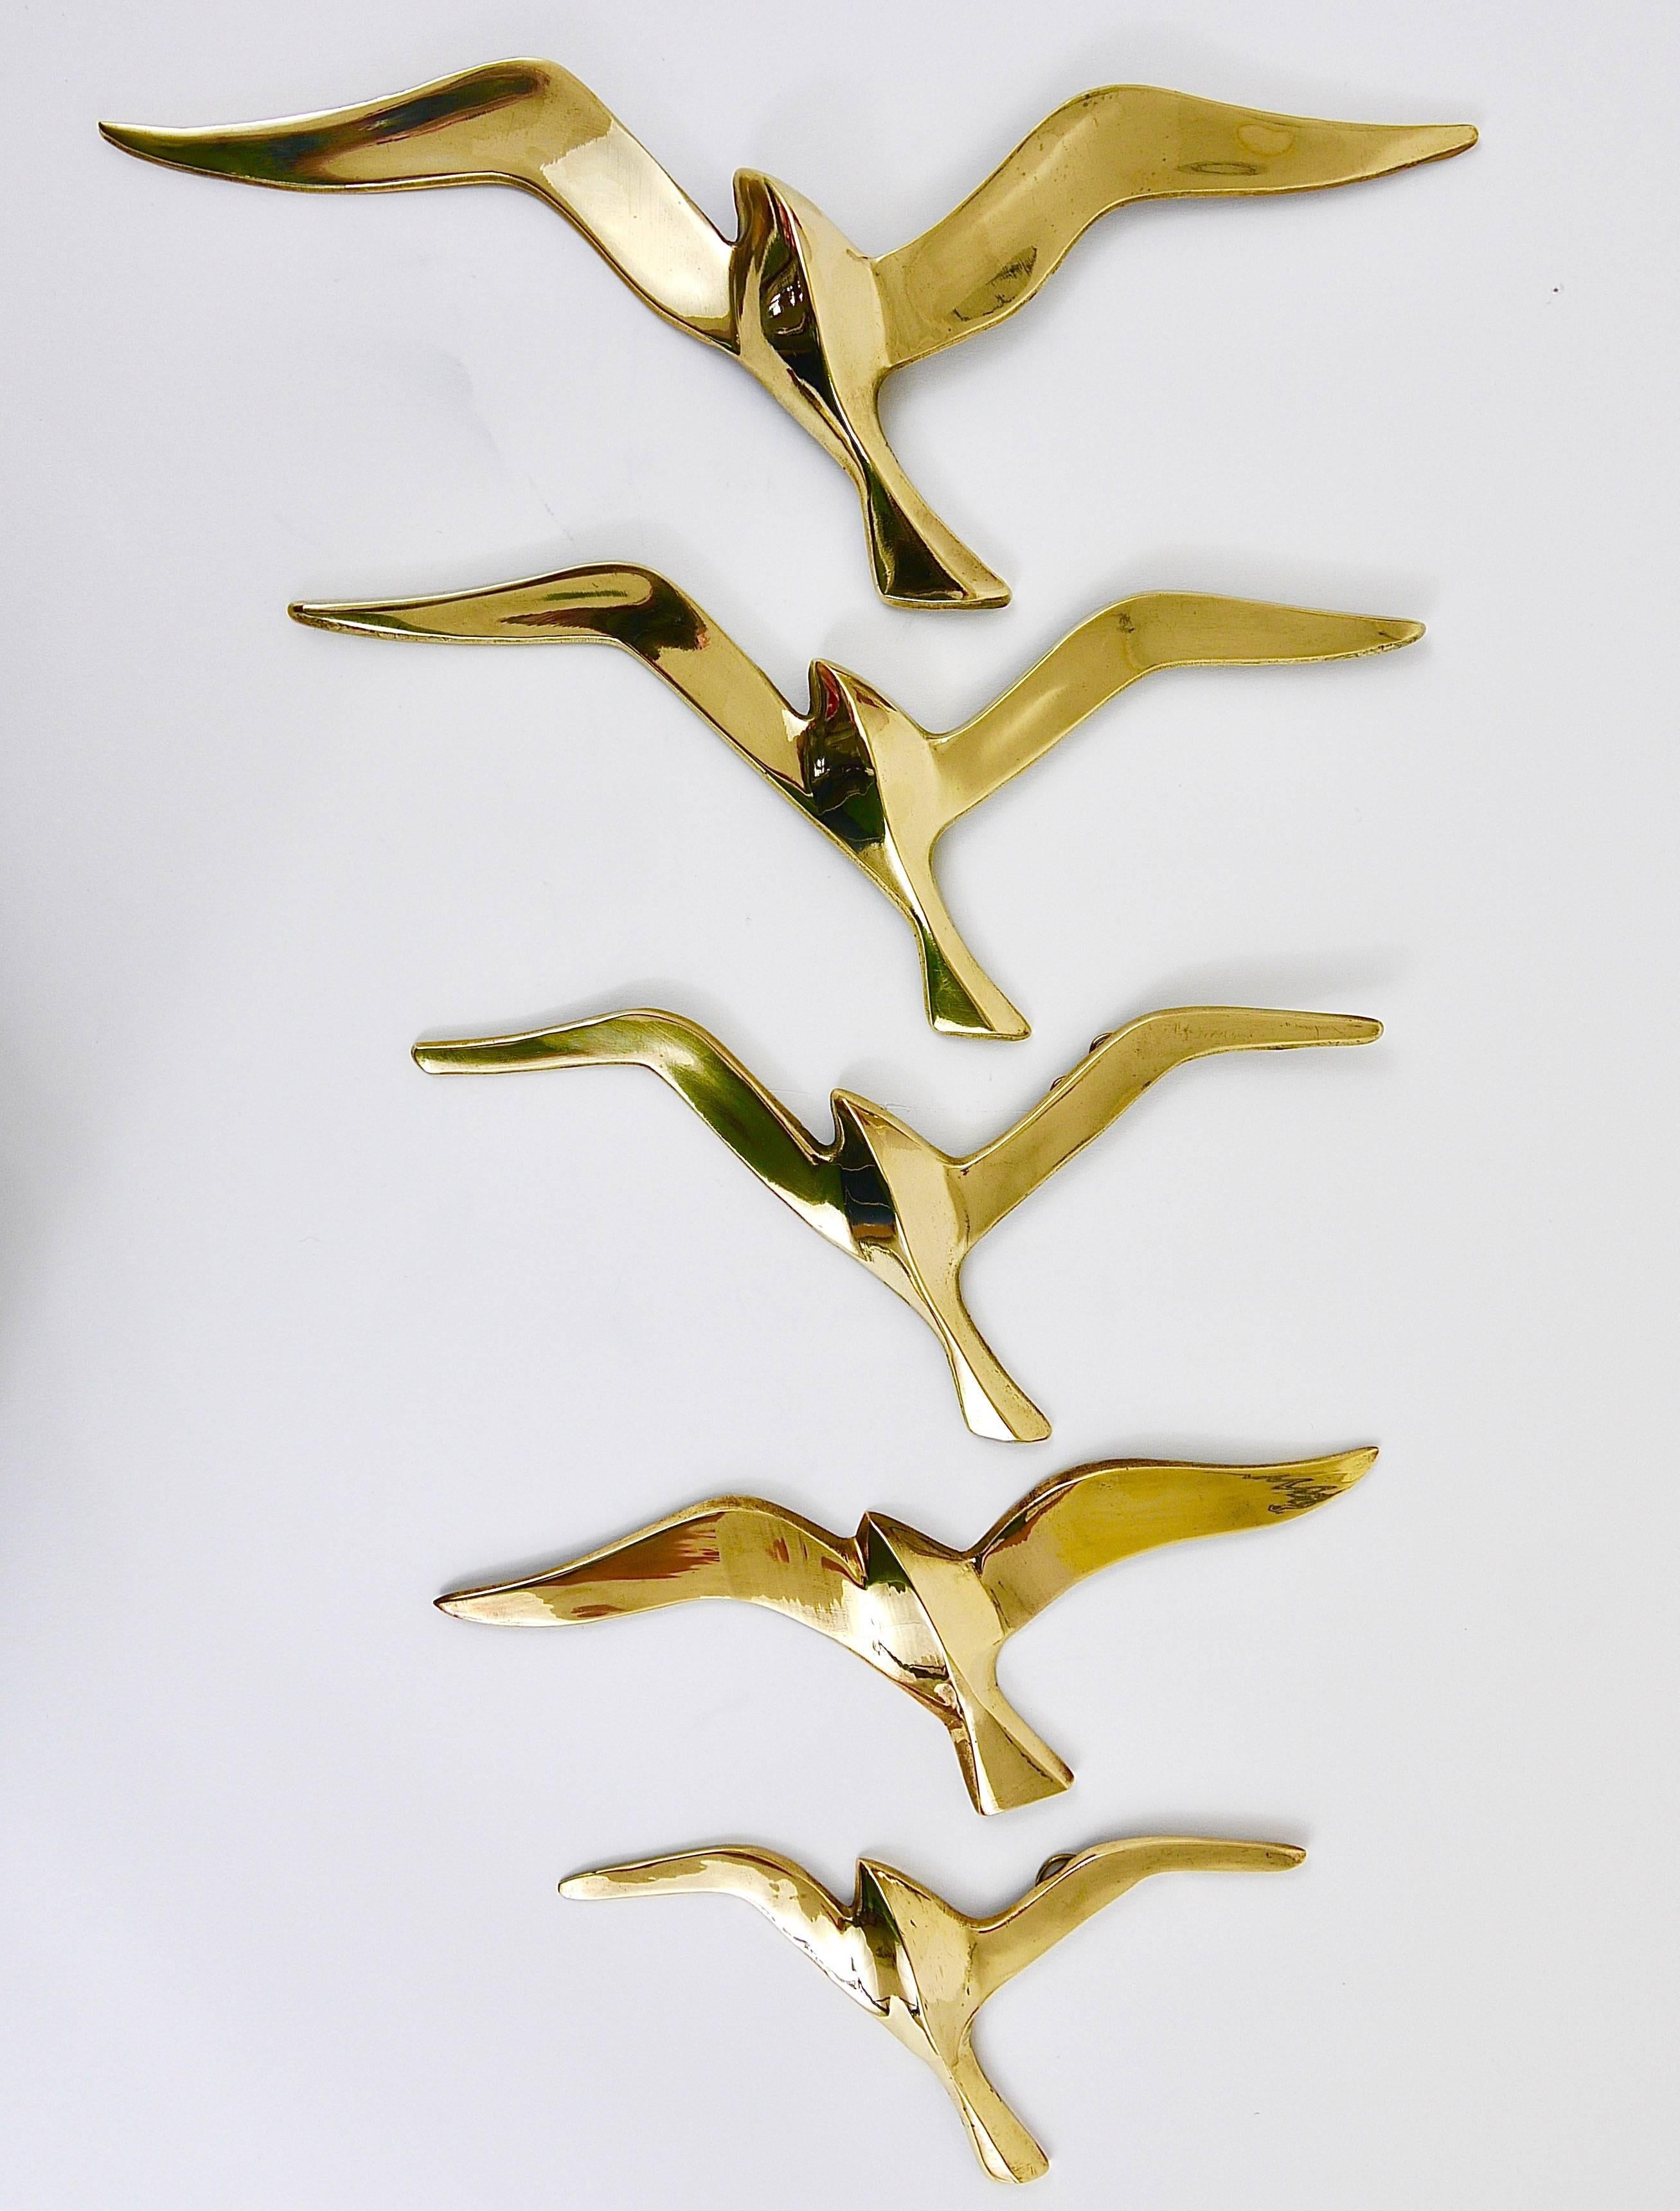 Polished Five Wall-Mounted Midcentury Seagull Bird Brass Sculptures, Austria, 1950s